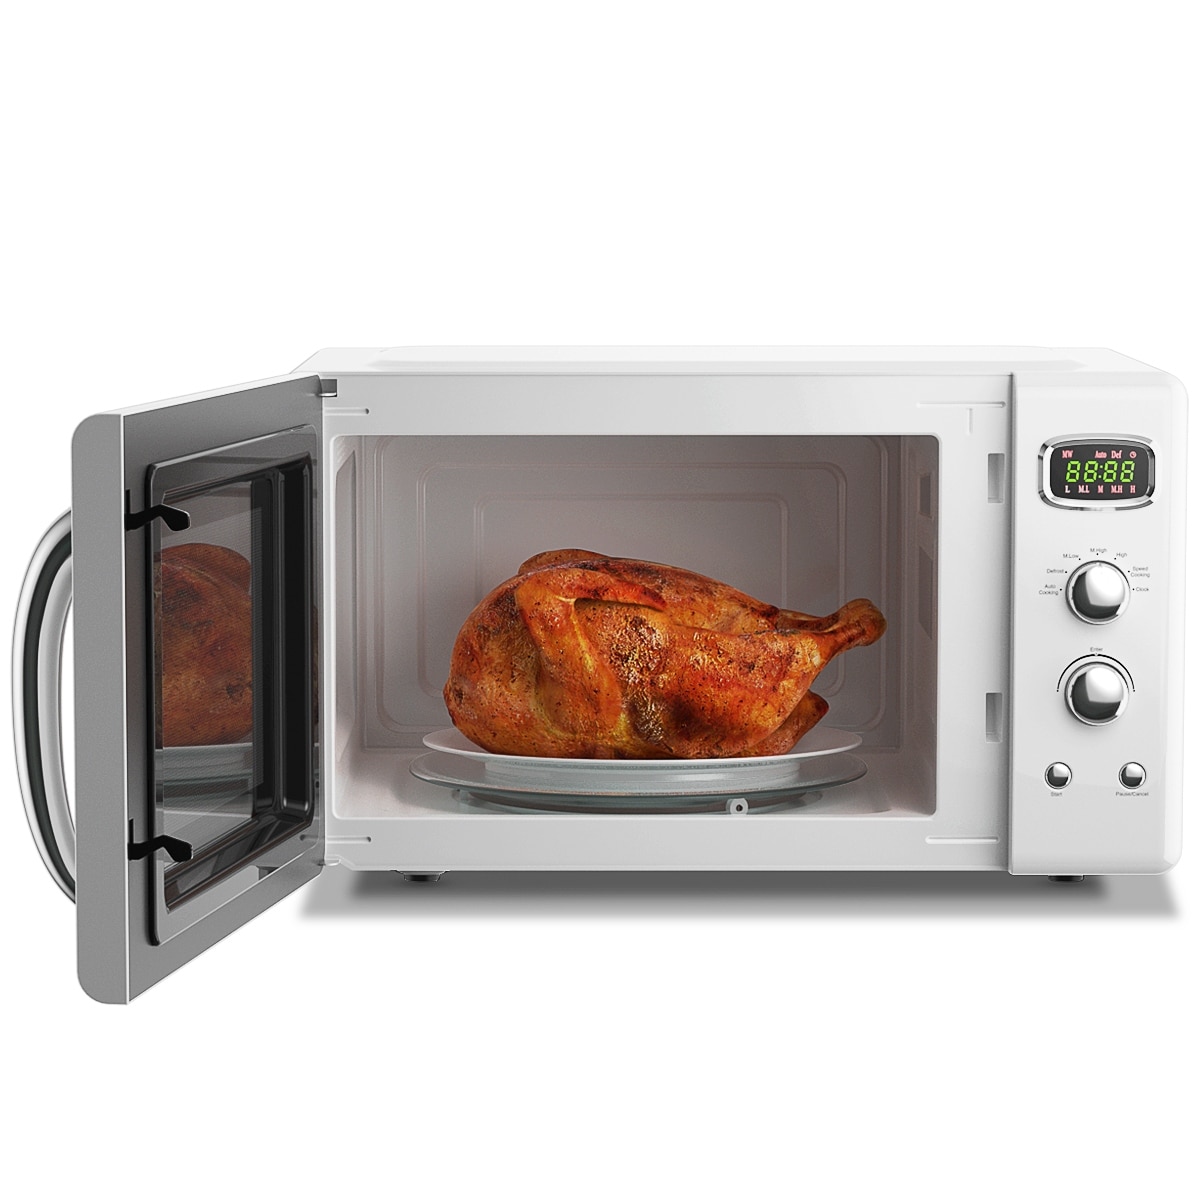 https://ak1.ostkcdn.com/images/products/is/images/direct/6b4a573db5bf1c6de4b7bccff8bbe9cca8b6e5f3/Costway-0.9Cu.ft.-Retro-Countertop-Compact-Microwave-Oven-900W-8.jpg